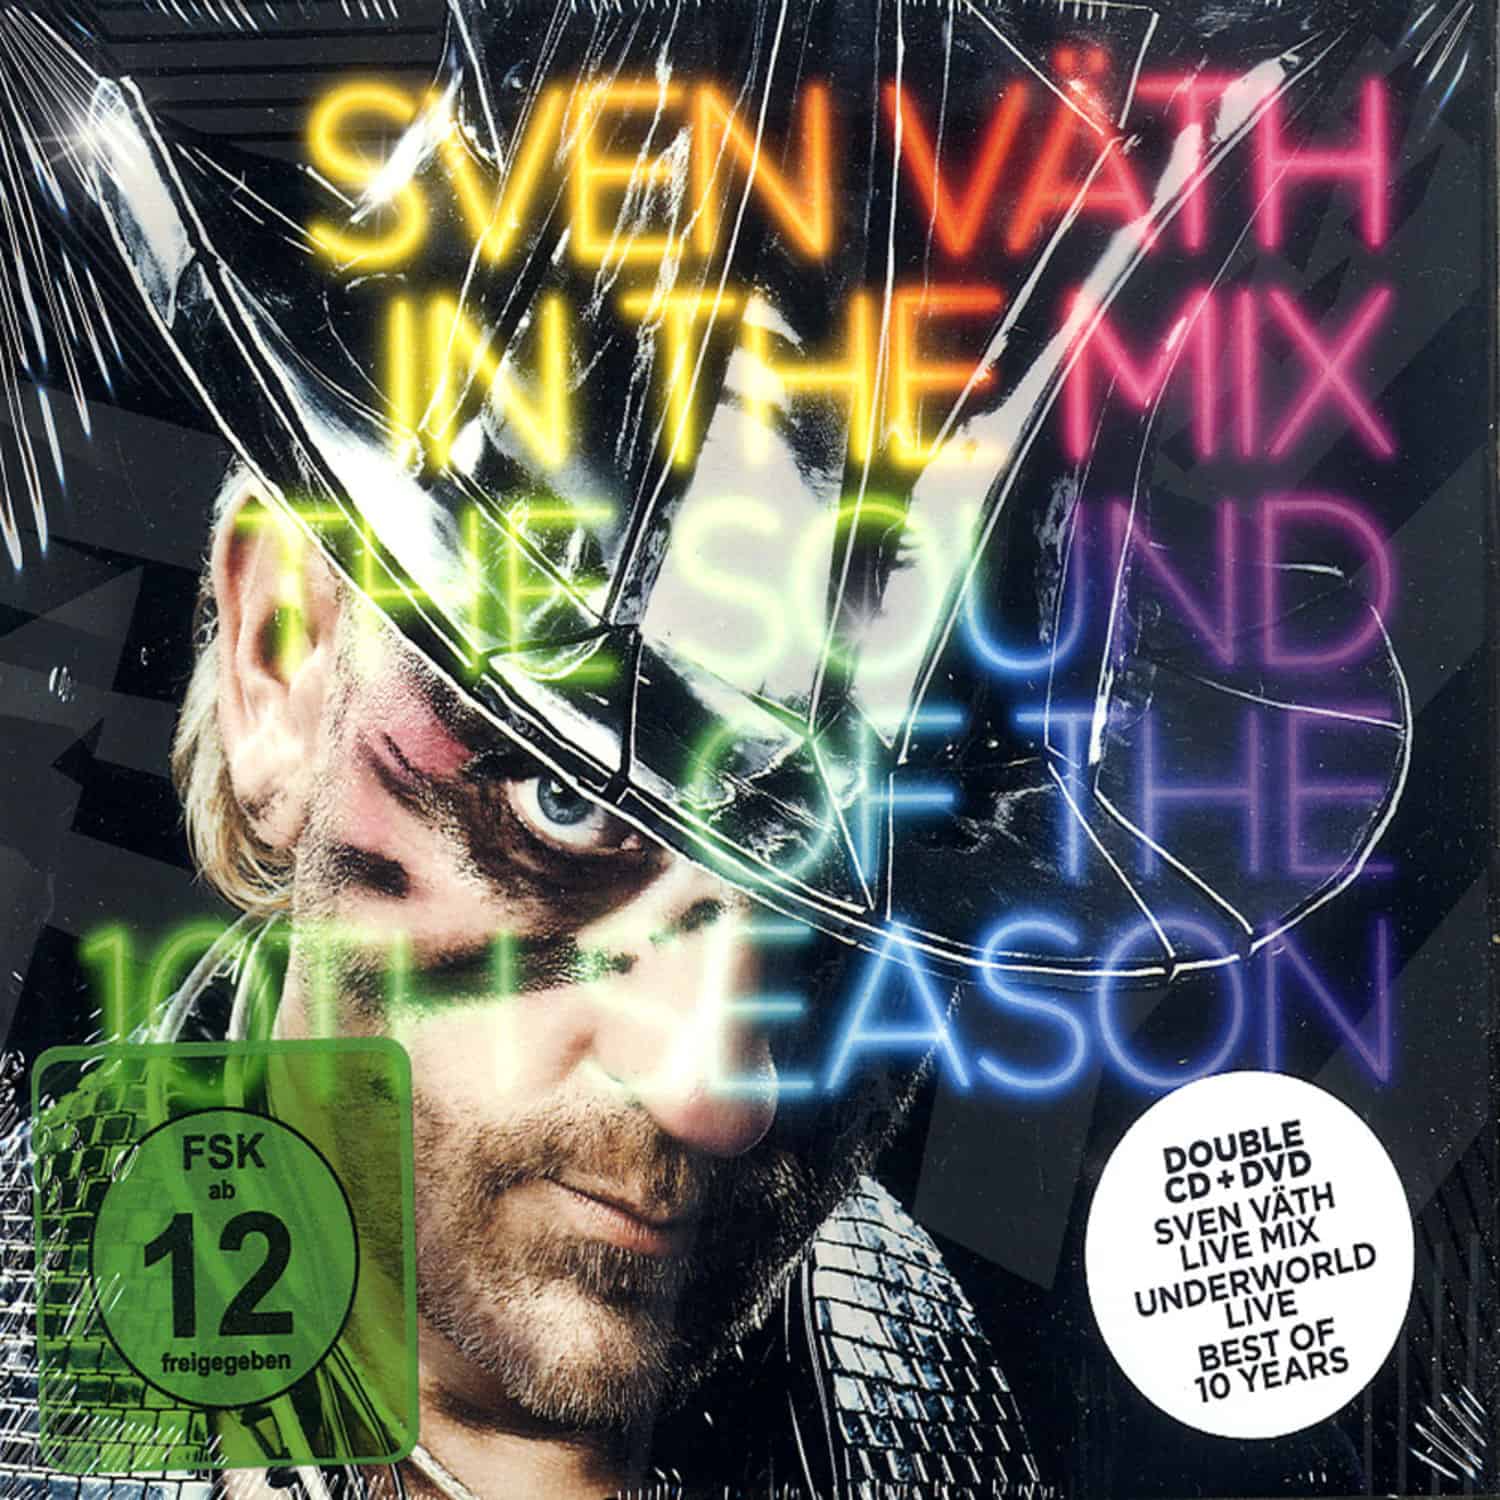 Sven Vth in the Mix - THE SOUND OF THE 10TH SEASON 